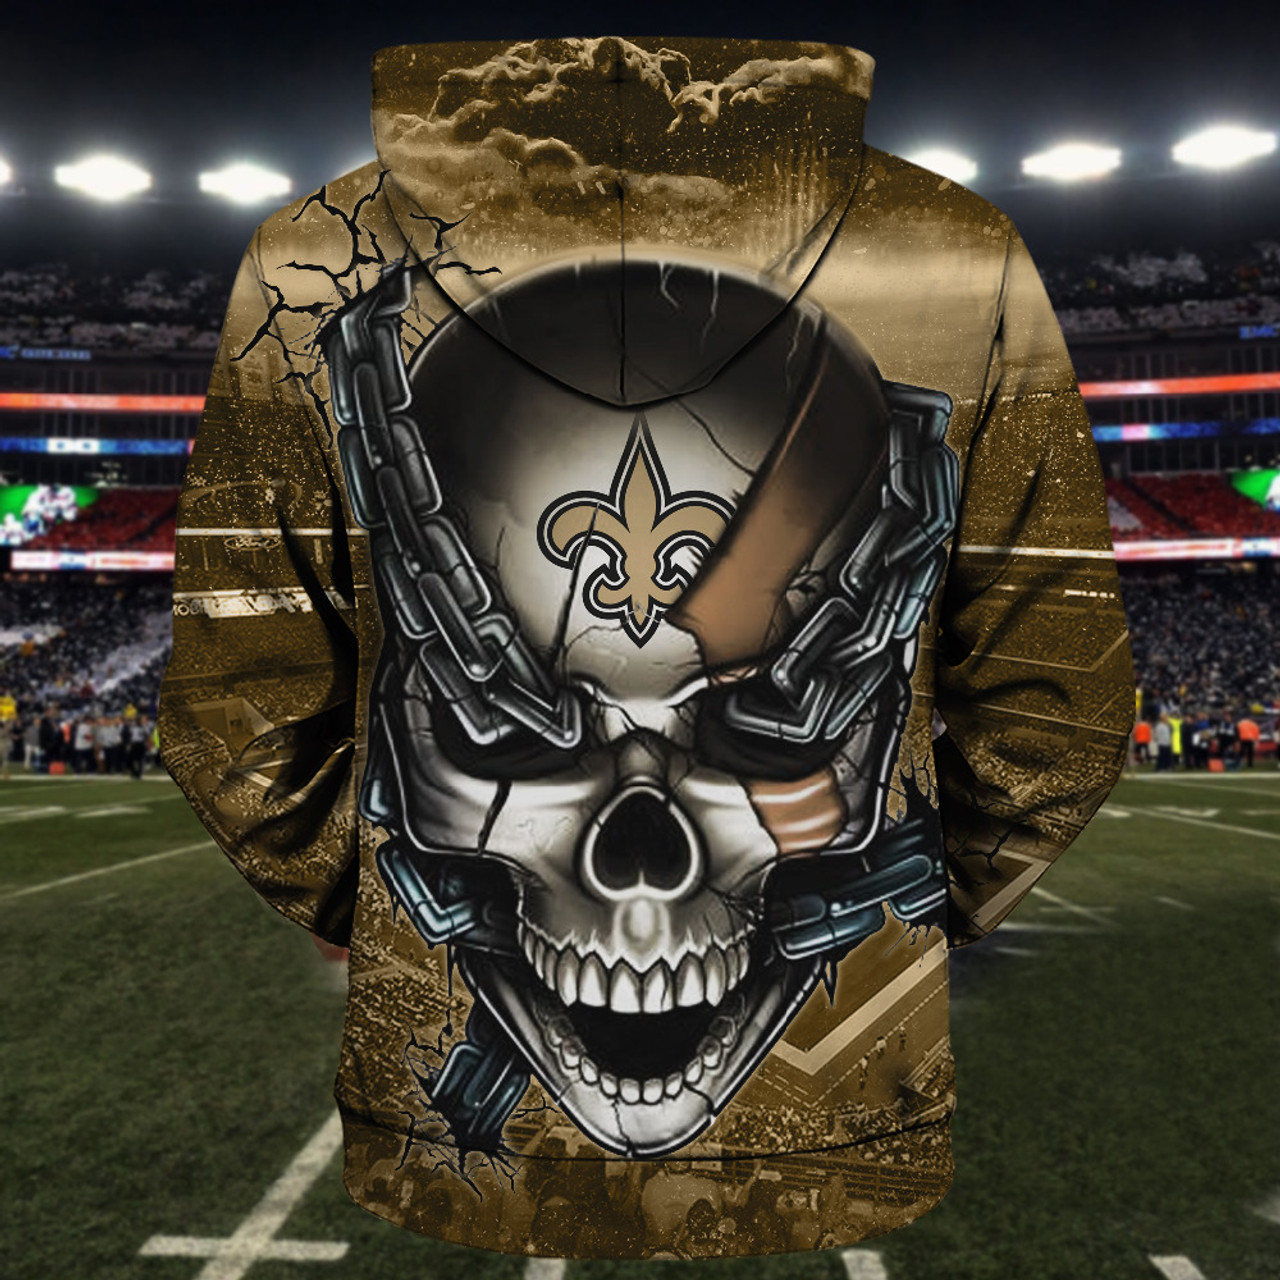  **(OFFICIAL-N.F.L.NEW-ORLEANS-SAINTS-TEAM-FOOTBALL-PULLOVER-HOODIES & SAINTS-TEAM-LOGO-SKULL/NEW-ORLEANS-CITY-CHAINS,NICE-CUSTOM-3D-GRAPHIC-PRINTED-DOUBLE-SIDED-TEAM-LOGOS & ALL-OVER-PRINTED-DESIGN/OFFICIAL-SAINTS-FOOTBALL-TEAM-PULLOVER-HOODIES)**